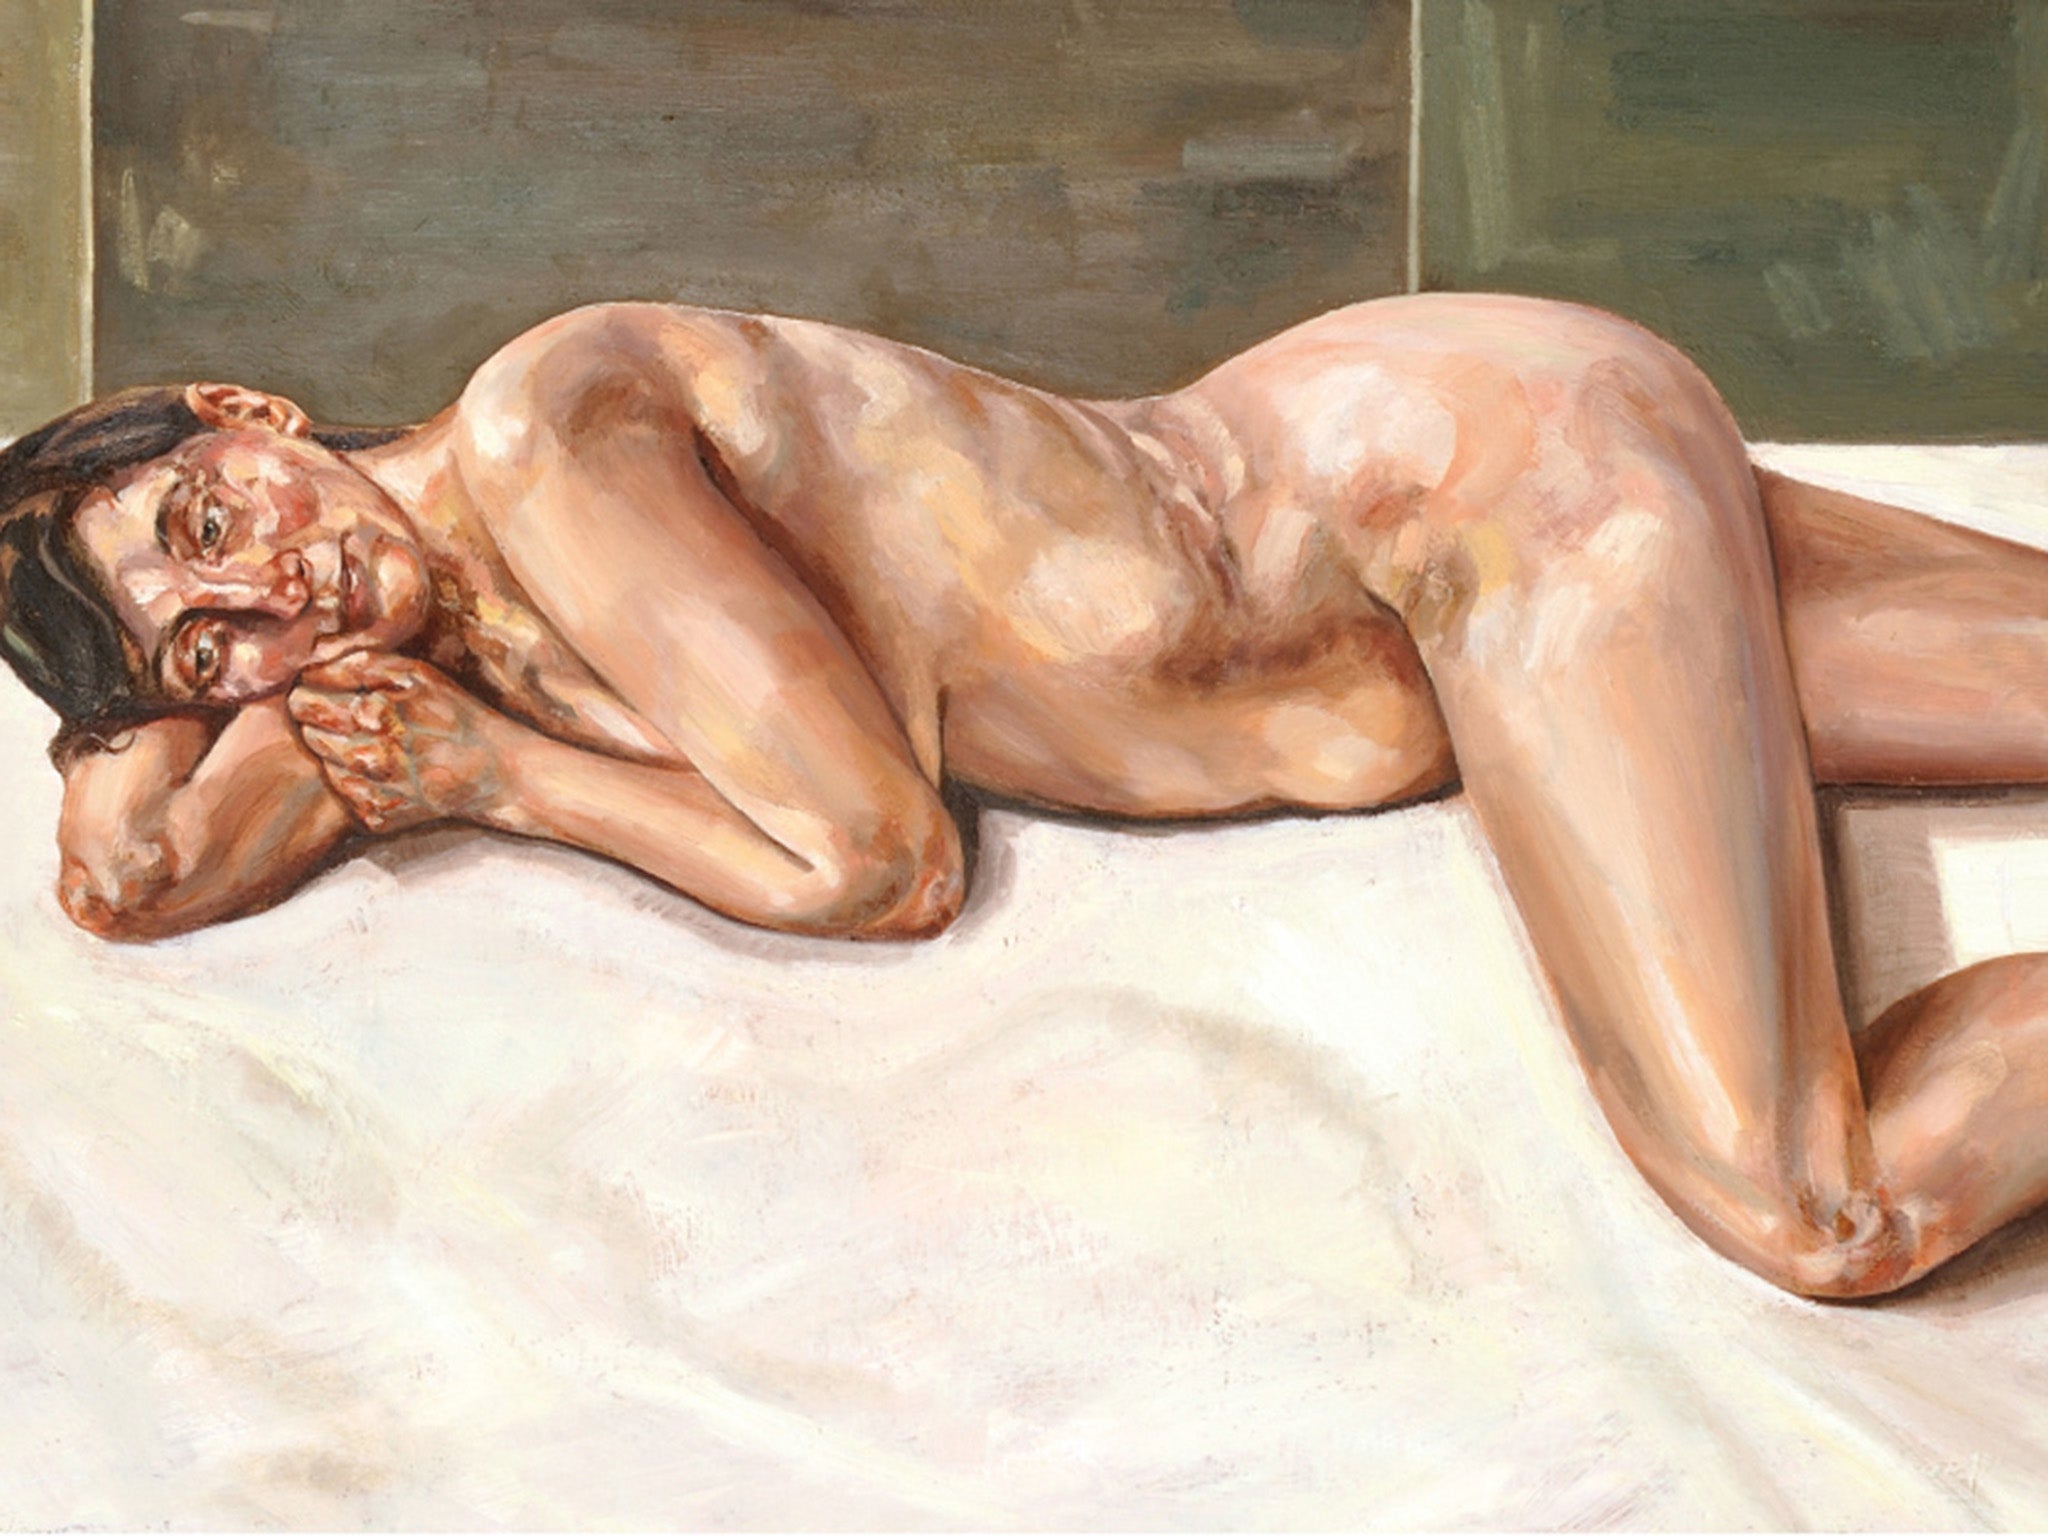 ‘Girl on a Bed is part of the ‘Point of Departure’ exhibition in London’s Mayfair